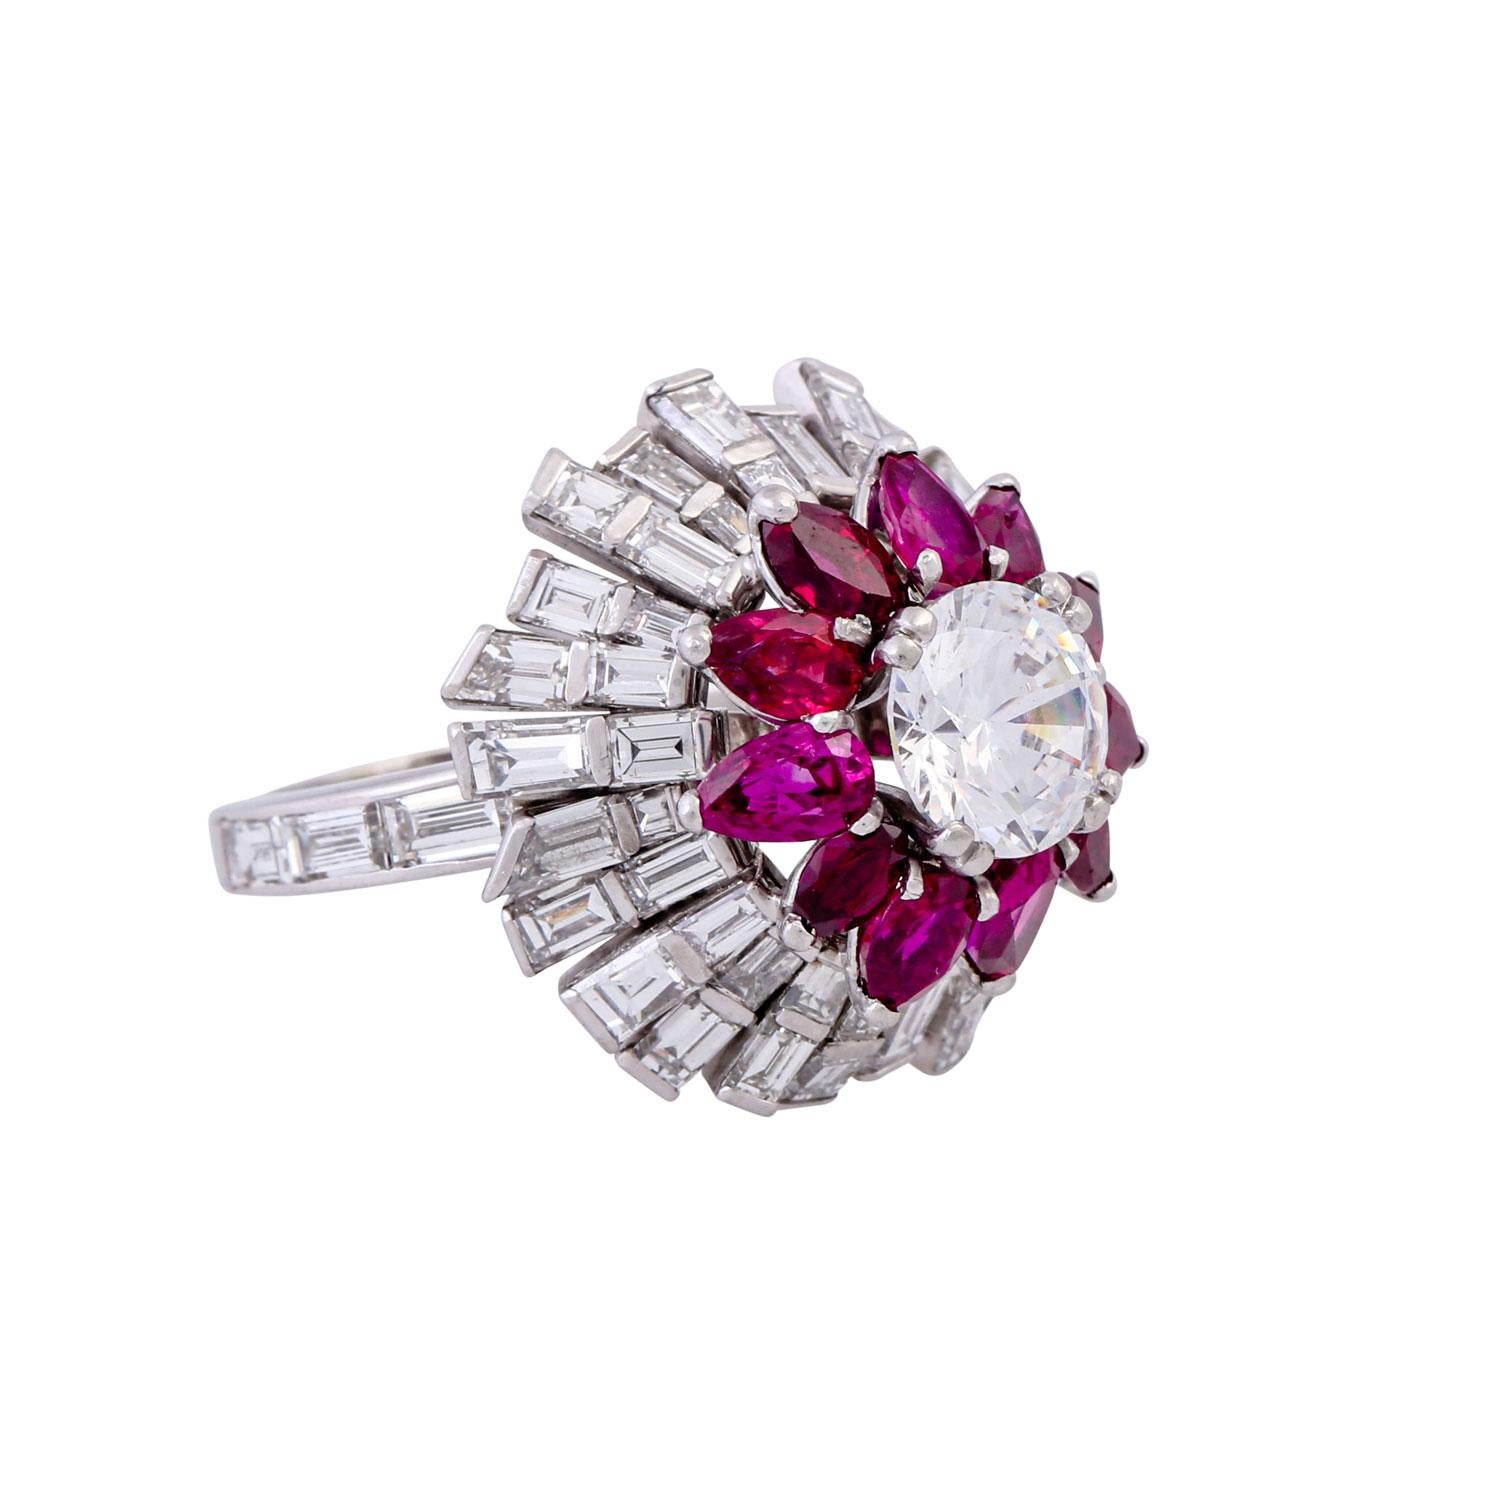 good color and clarity, baguette and trapezoid cut, a diamond imitation in the middle, rubies of good quality, total approx. 2.2 ct pear and navette cut, partly with notches, rubbed, platinum, 14.7 g, RW: 57, 2nd half of the 20th century, signs of